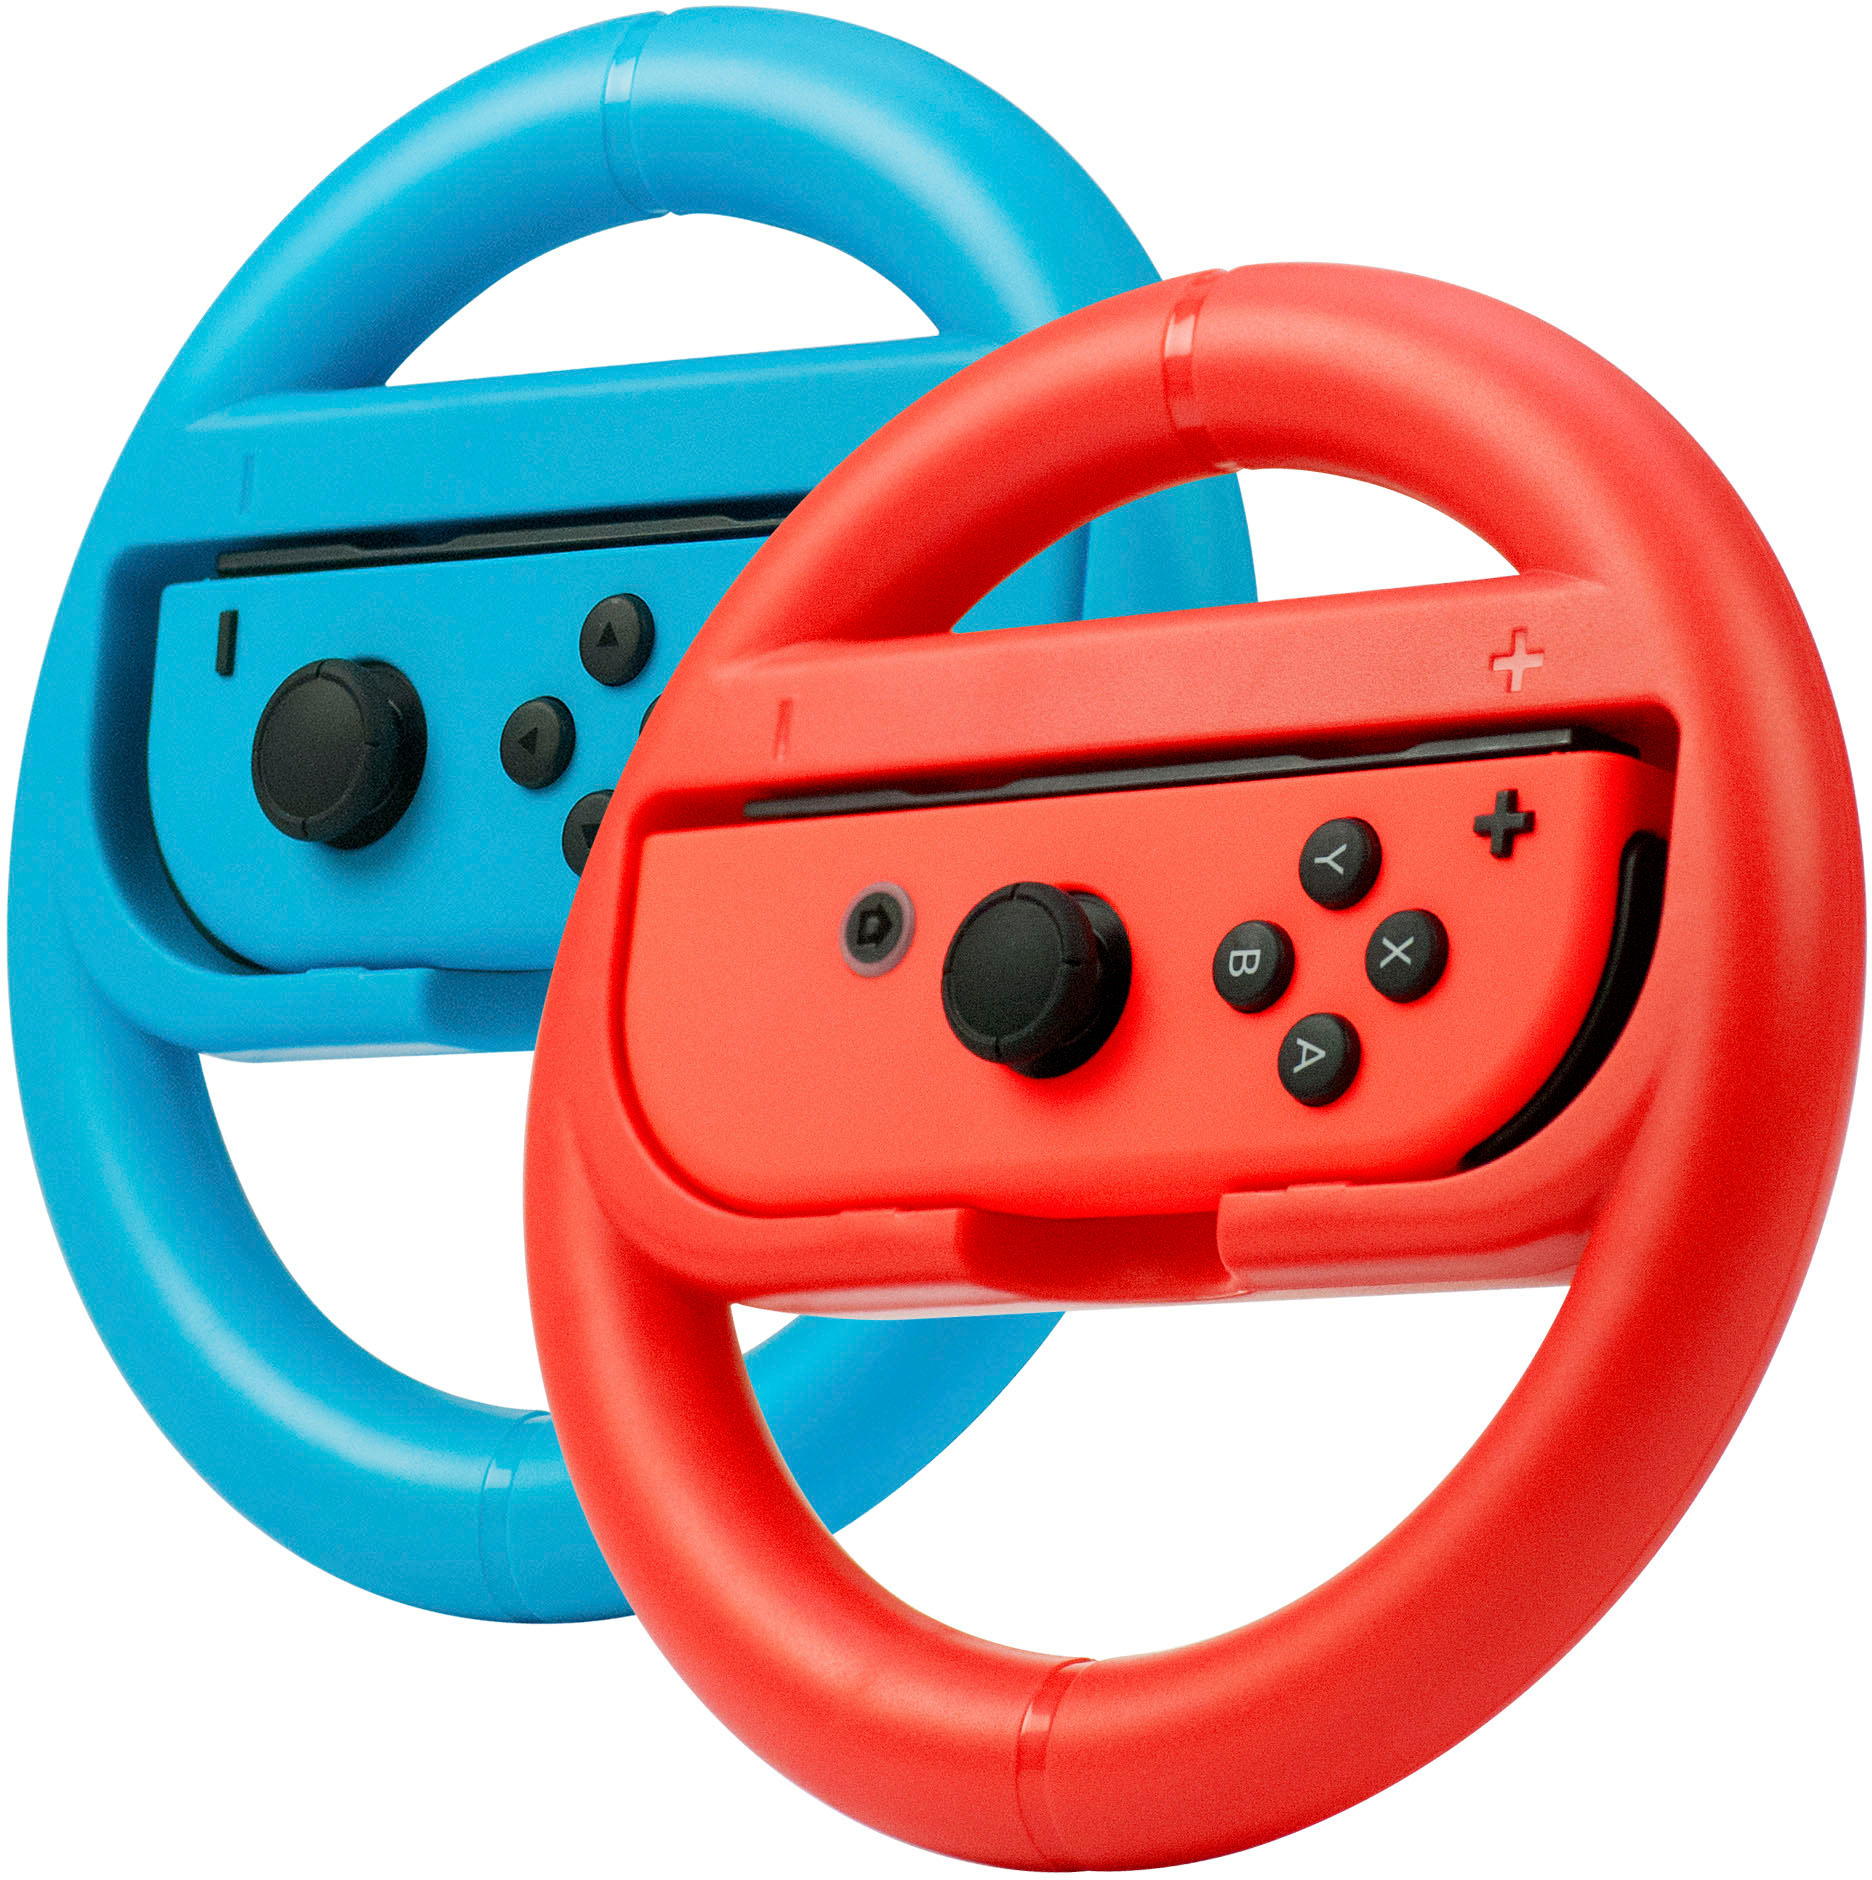 0600603264375 - ROCKETFISH™ - JOY CON RACING WHEEL TWO PACK FOR NINTENDO SWITCH & SWITCH OLED - RED/BLUE